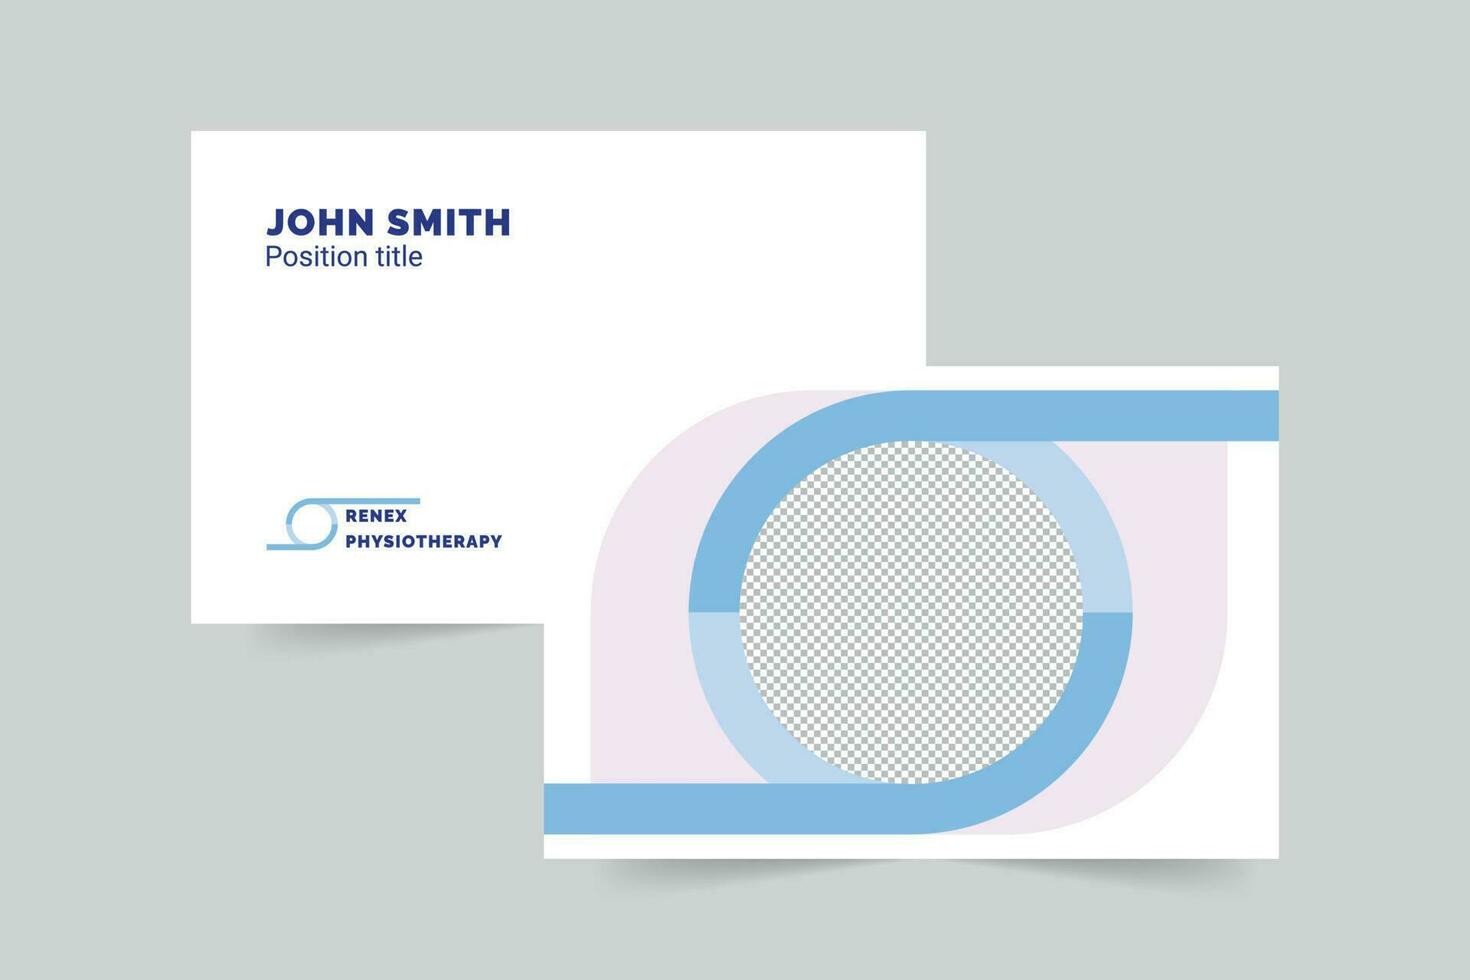 Physiotherapy business card template. A clean, modern, and high-quality design business card vector design. Editable and customize template business card